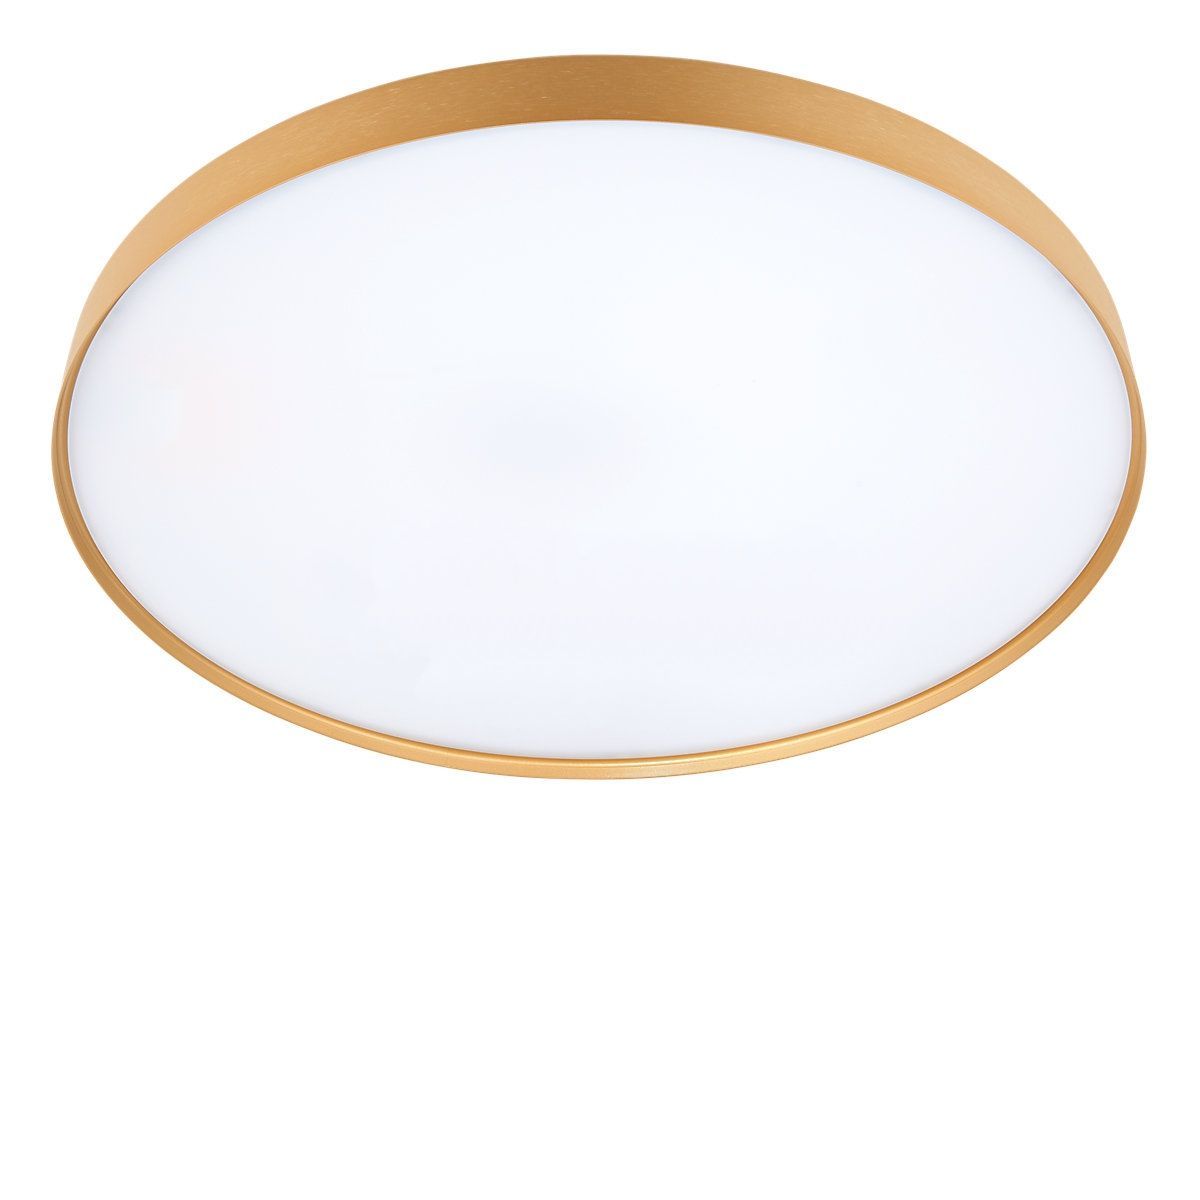 Overhead lamp Compendium Plate by Luceplan